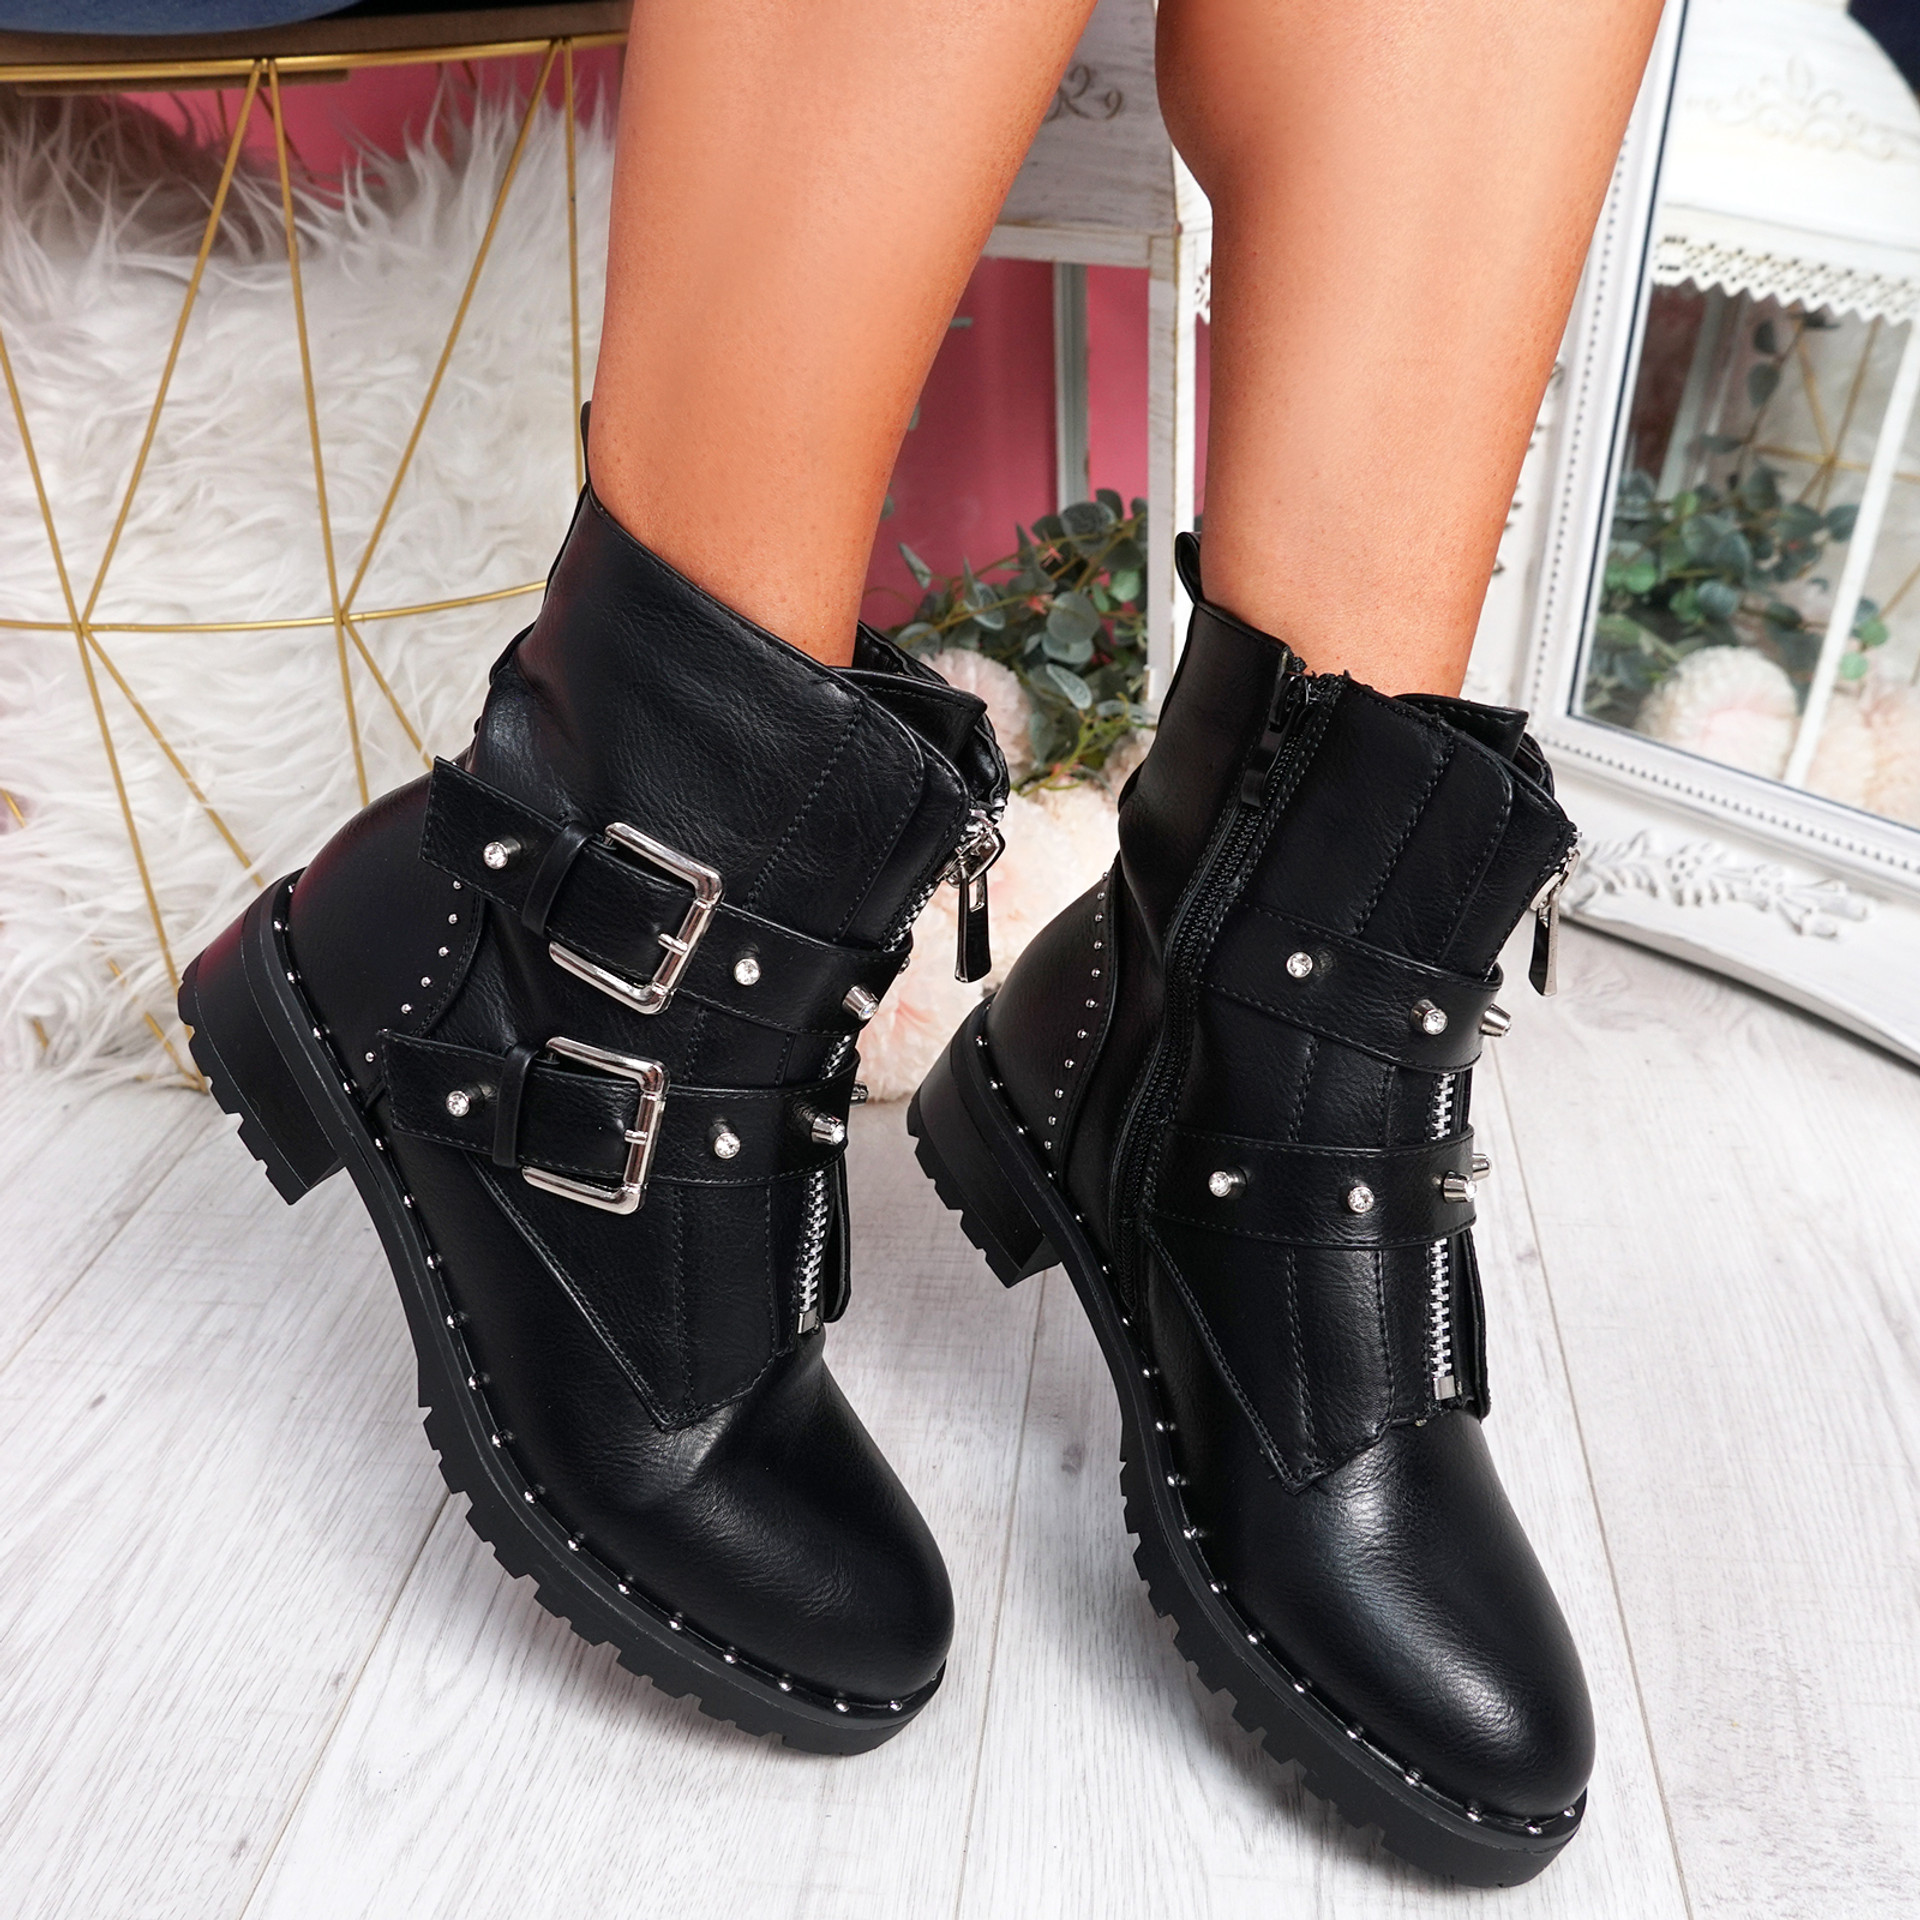 Lunne Black Pu Studded Ankle Boots